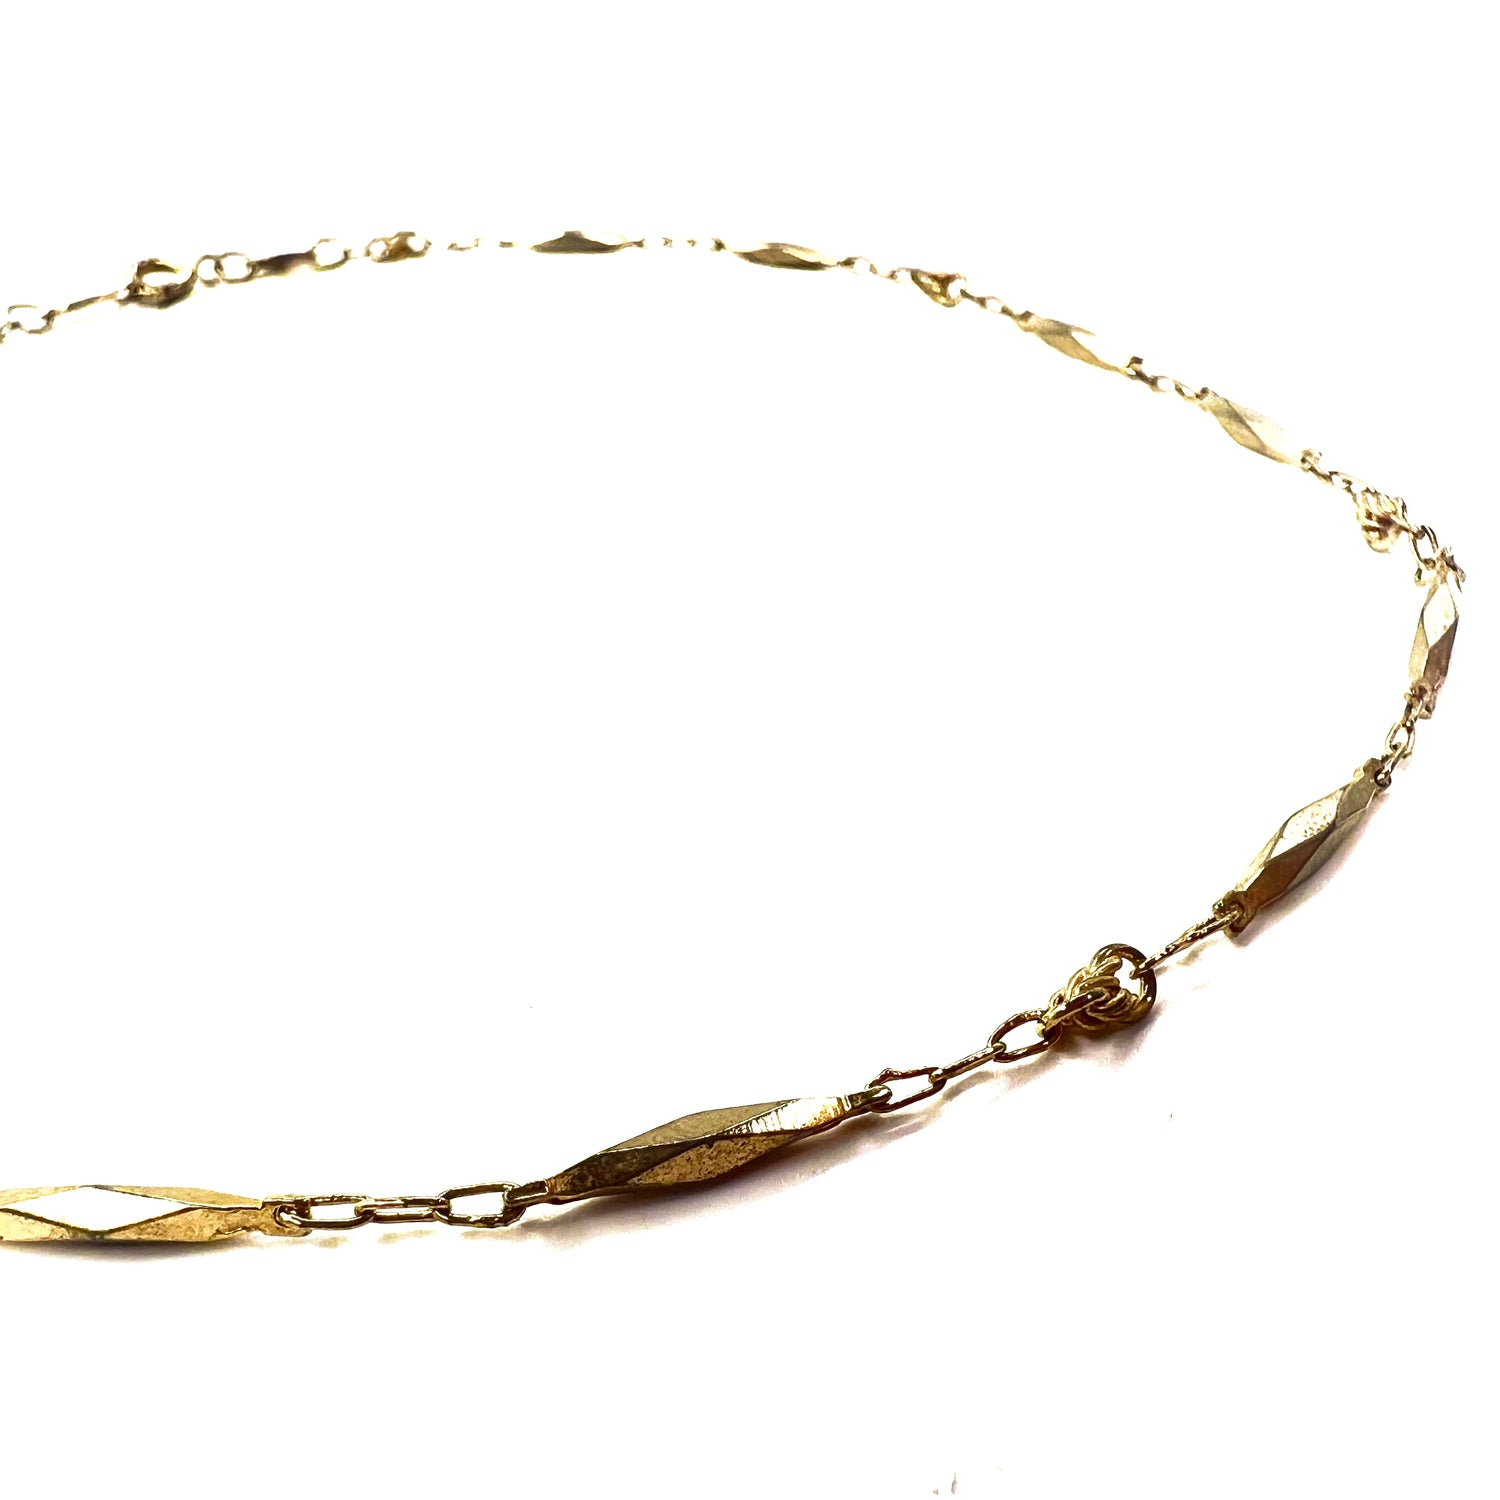 Vintage Gold Necklaces ネックレス 切子チェーン ゴールド K18GF